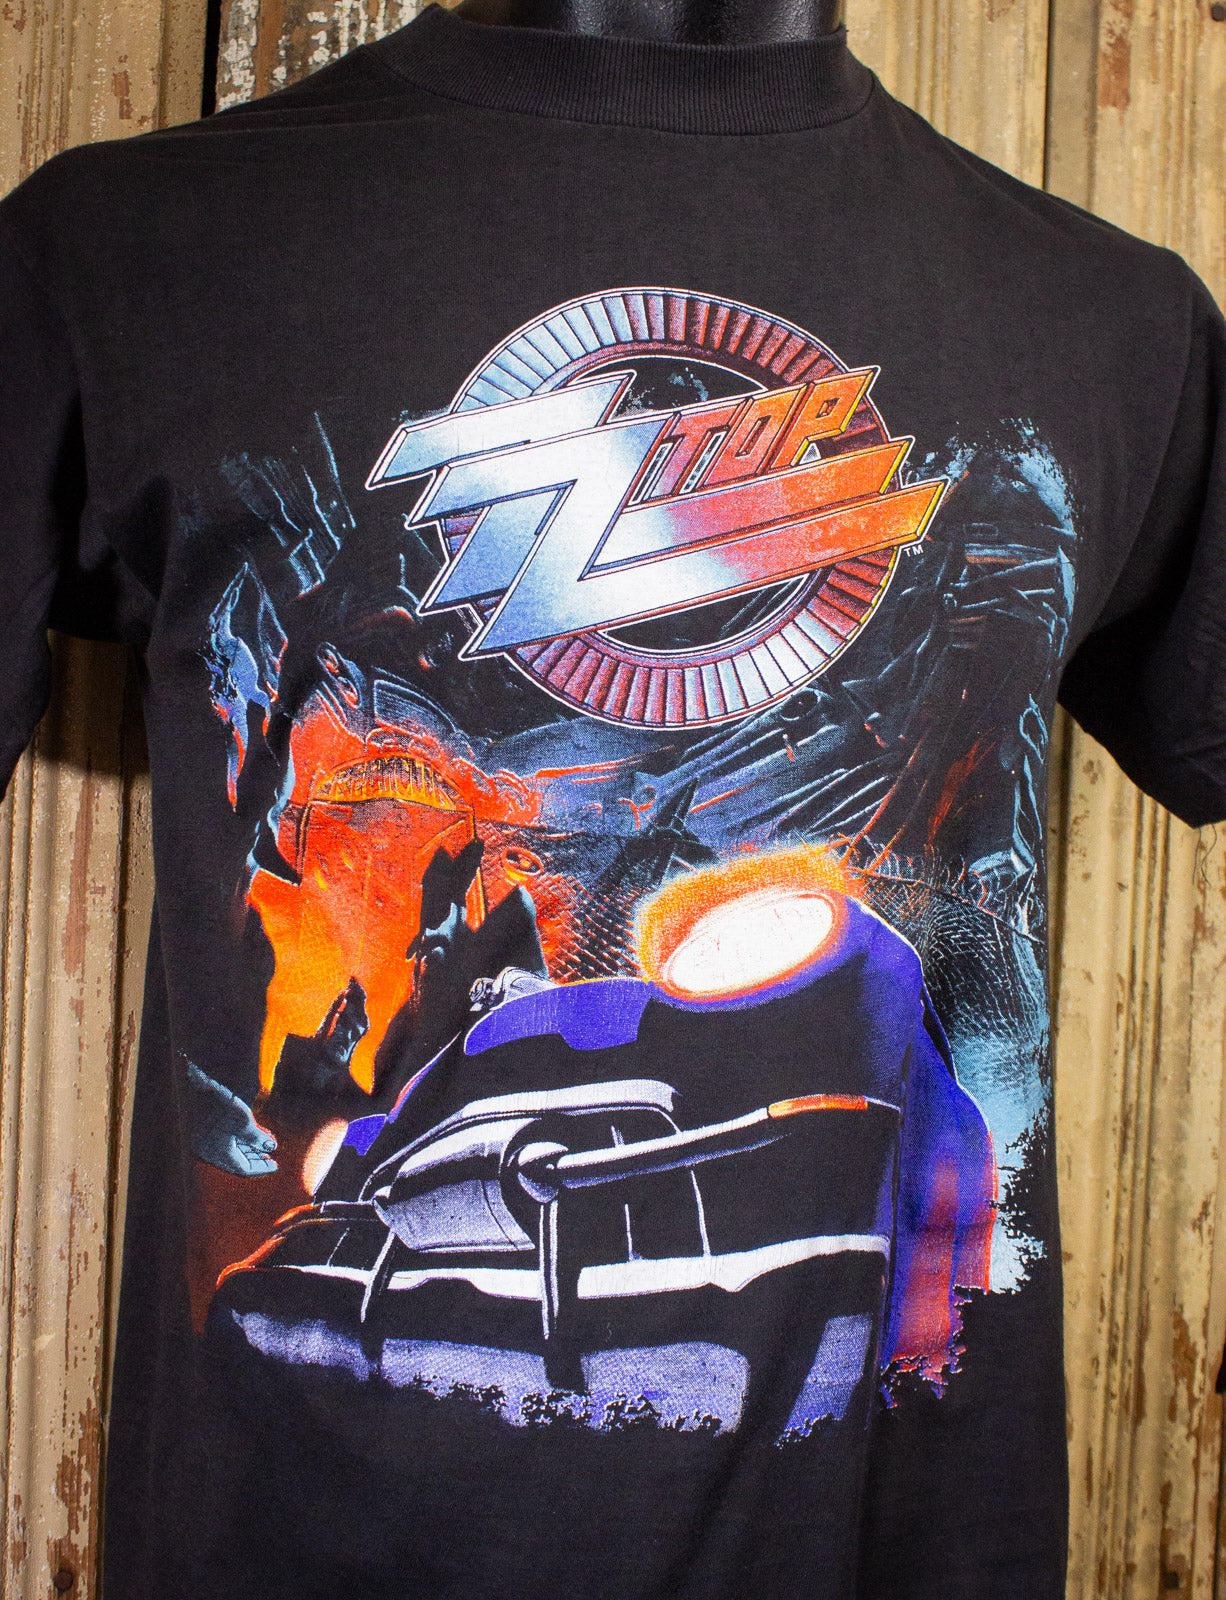 Vintage ZZ Top Recycler World Tour Concert T Shirt 1991 Black Small